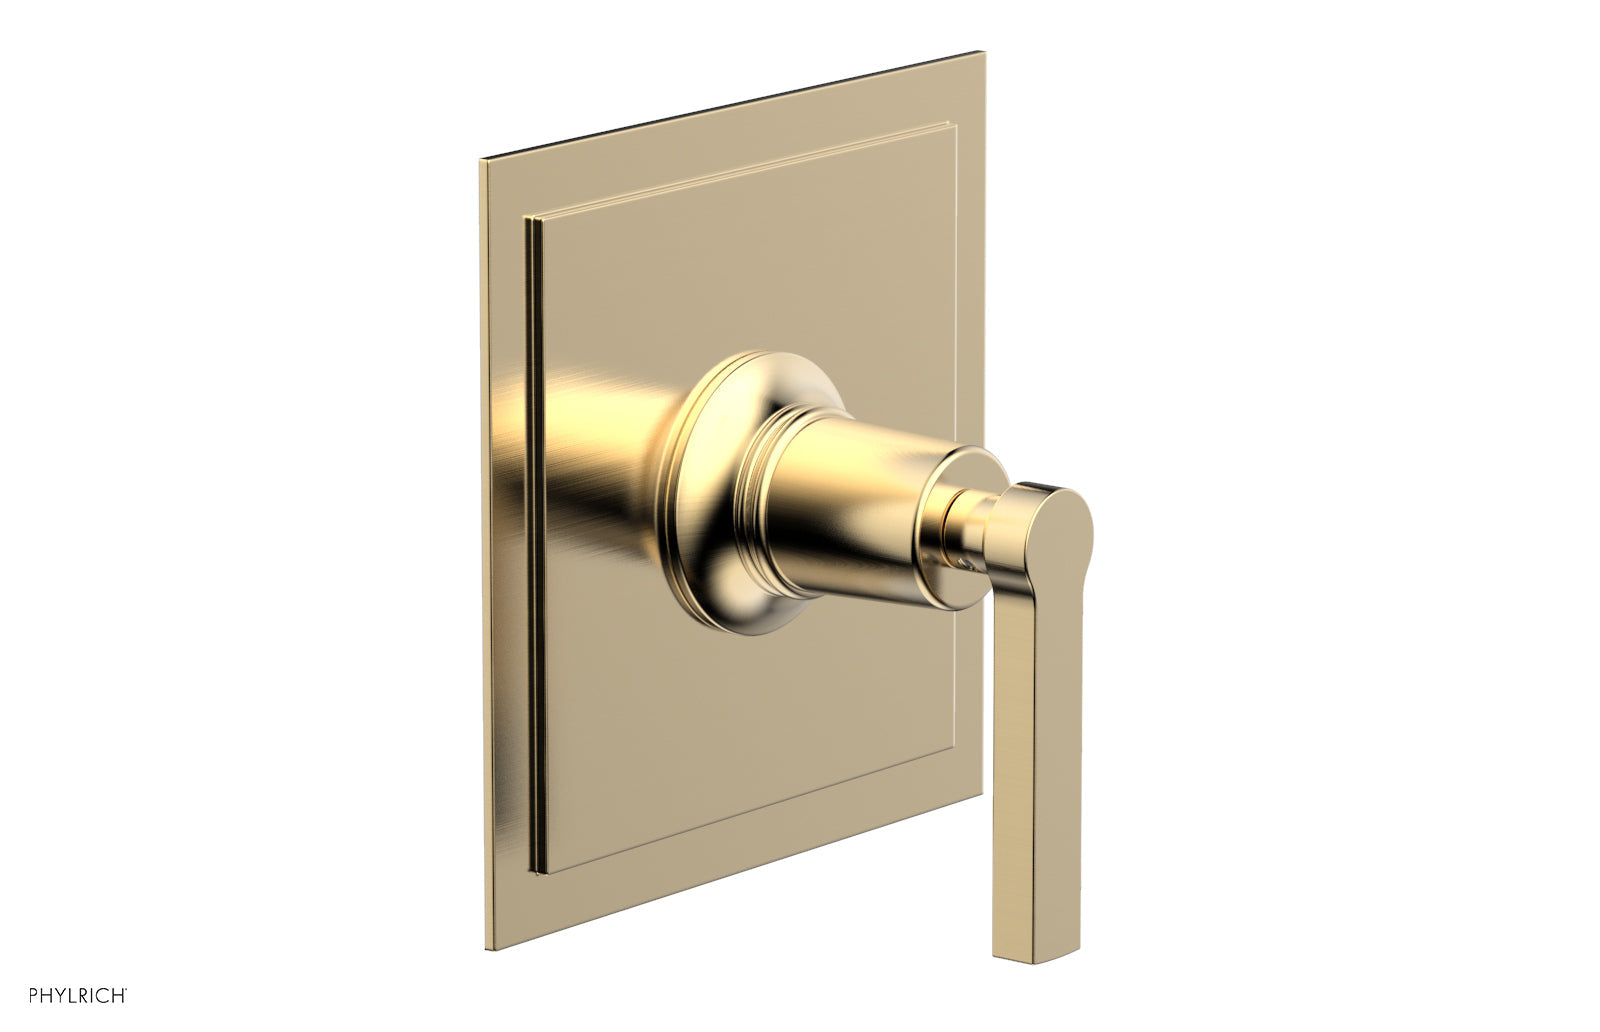 Phylrich HEX MODERN Lever Handle Trim (1/2" or 3/4")